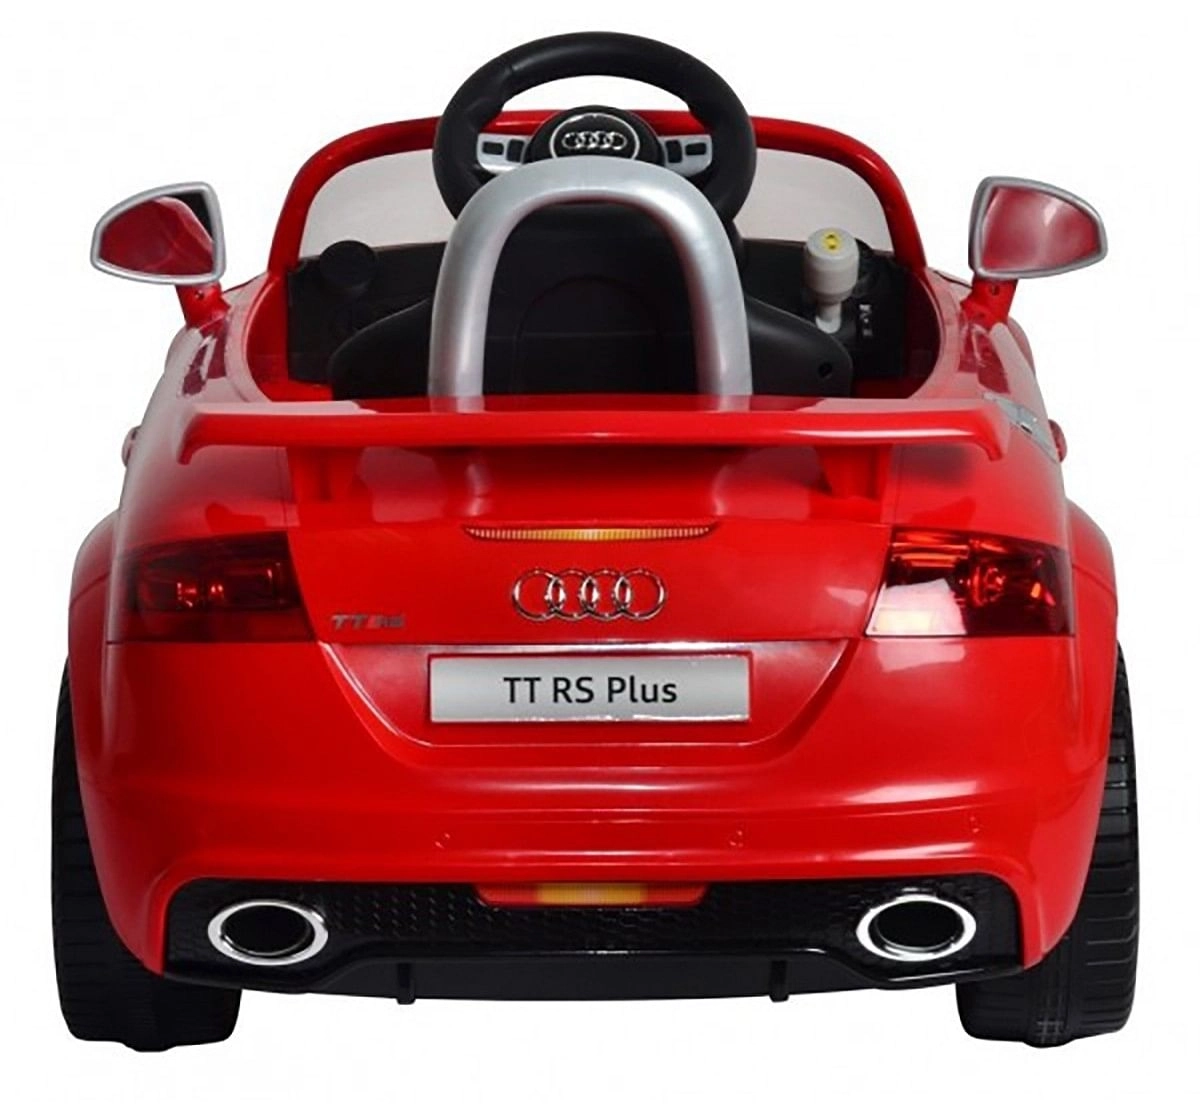 Chilokbo Audi TT RS Battery Operated Ride-on Car Battery Operated Rideons for Kids age 18M + (Red)